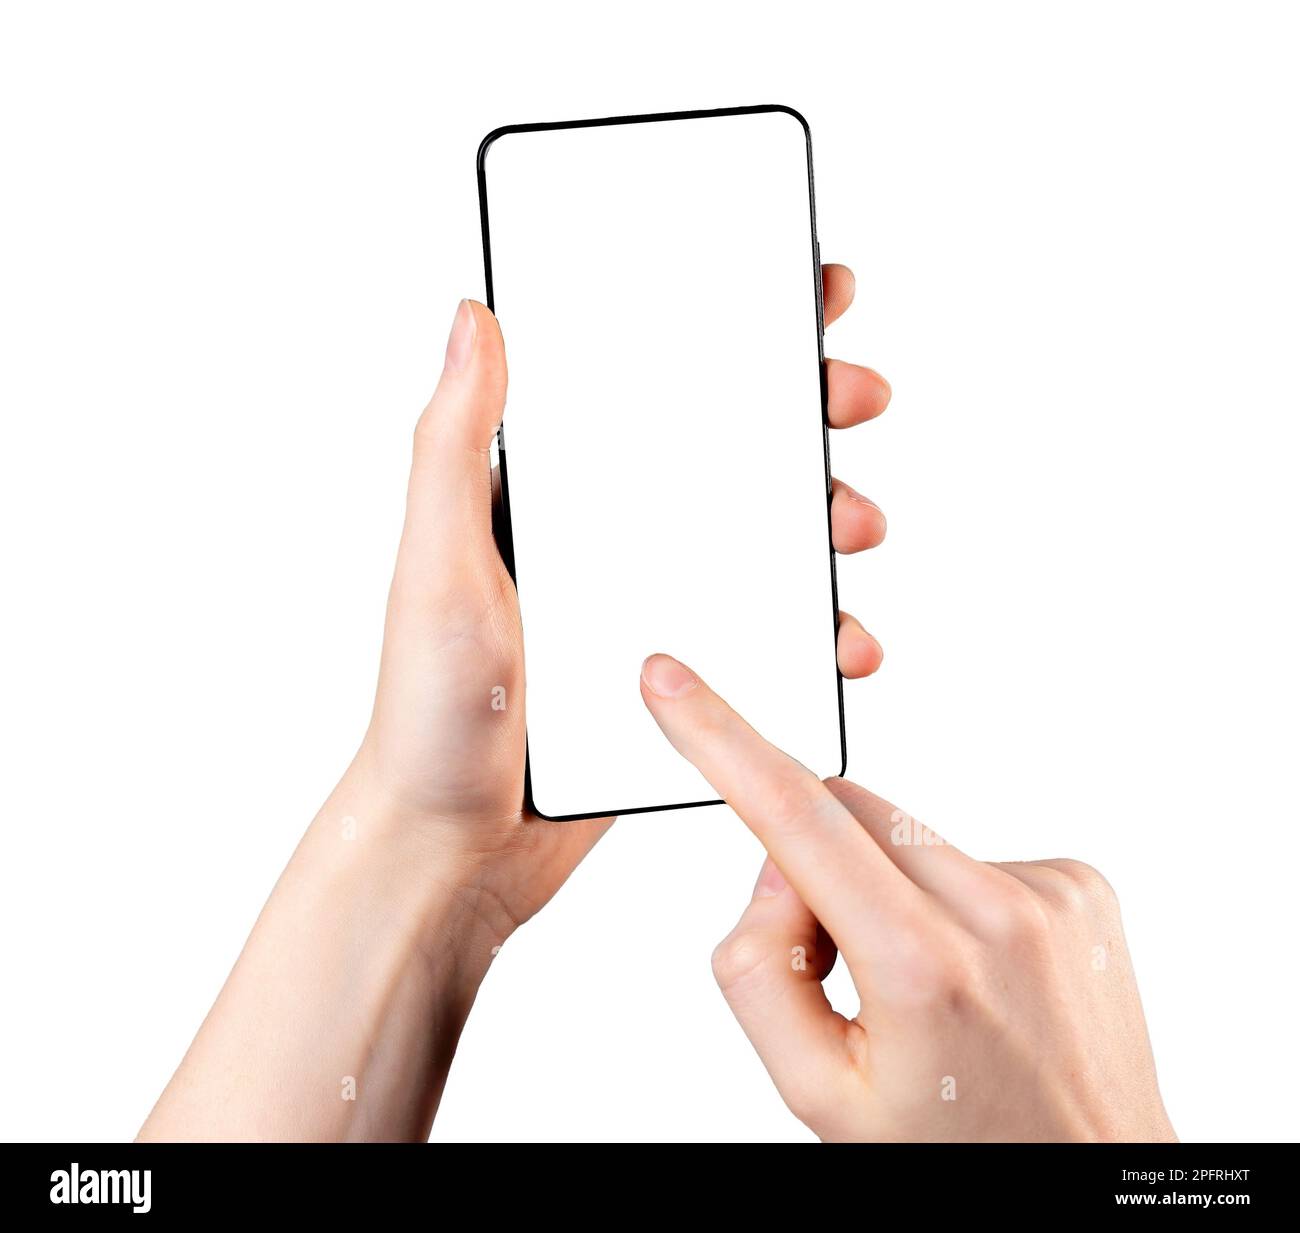 Finger tapping on blank mobile phone screen, smartphone display mockup isolated on white background. Stock Photo